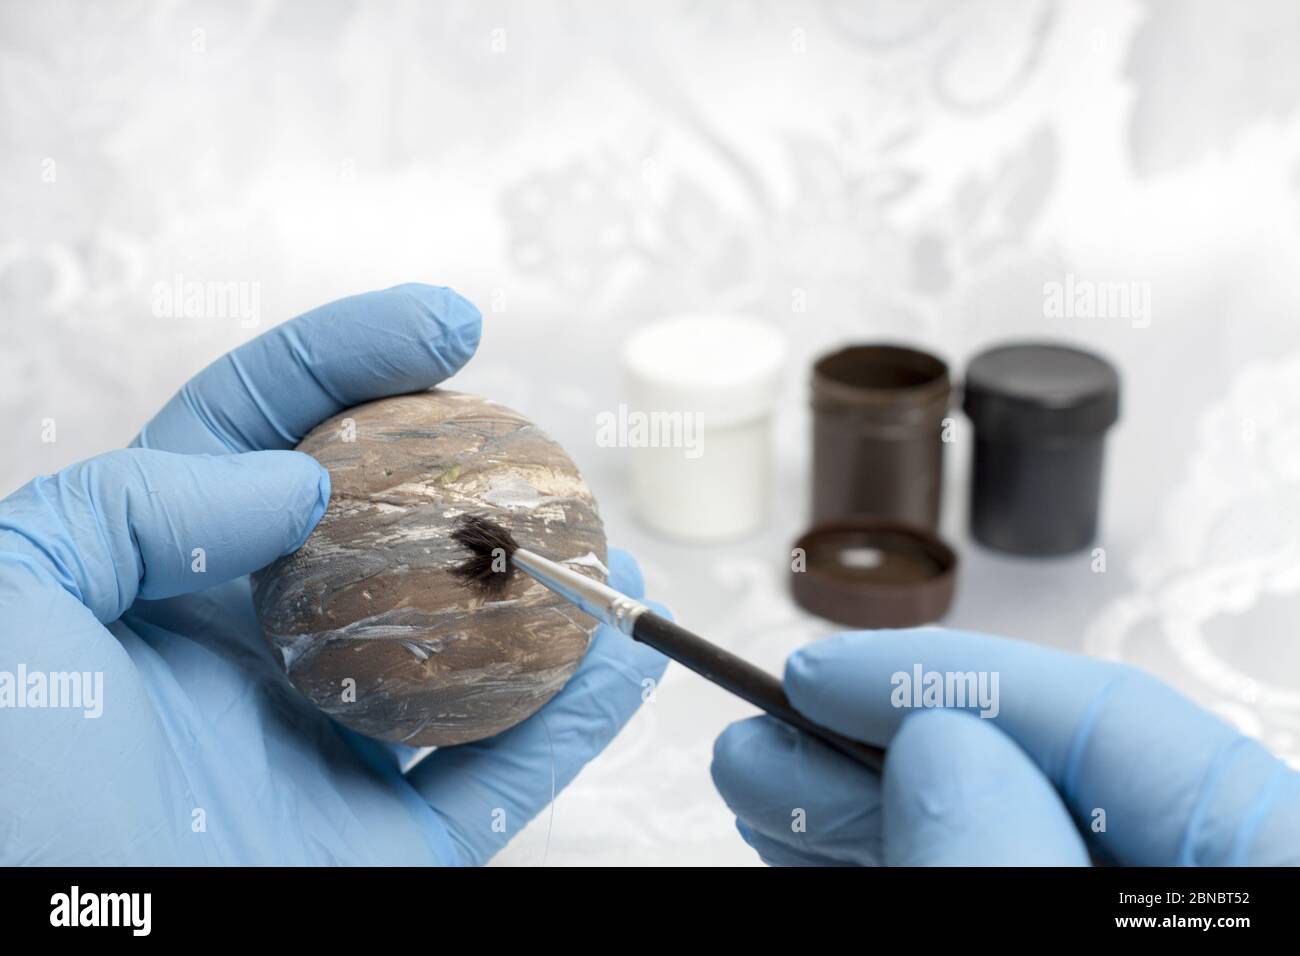 A human hand in blue protective gloves painting the planet Venus on a styrofoam ball and in the background there are paints of black, brown and white. Stock Photo